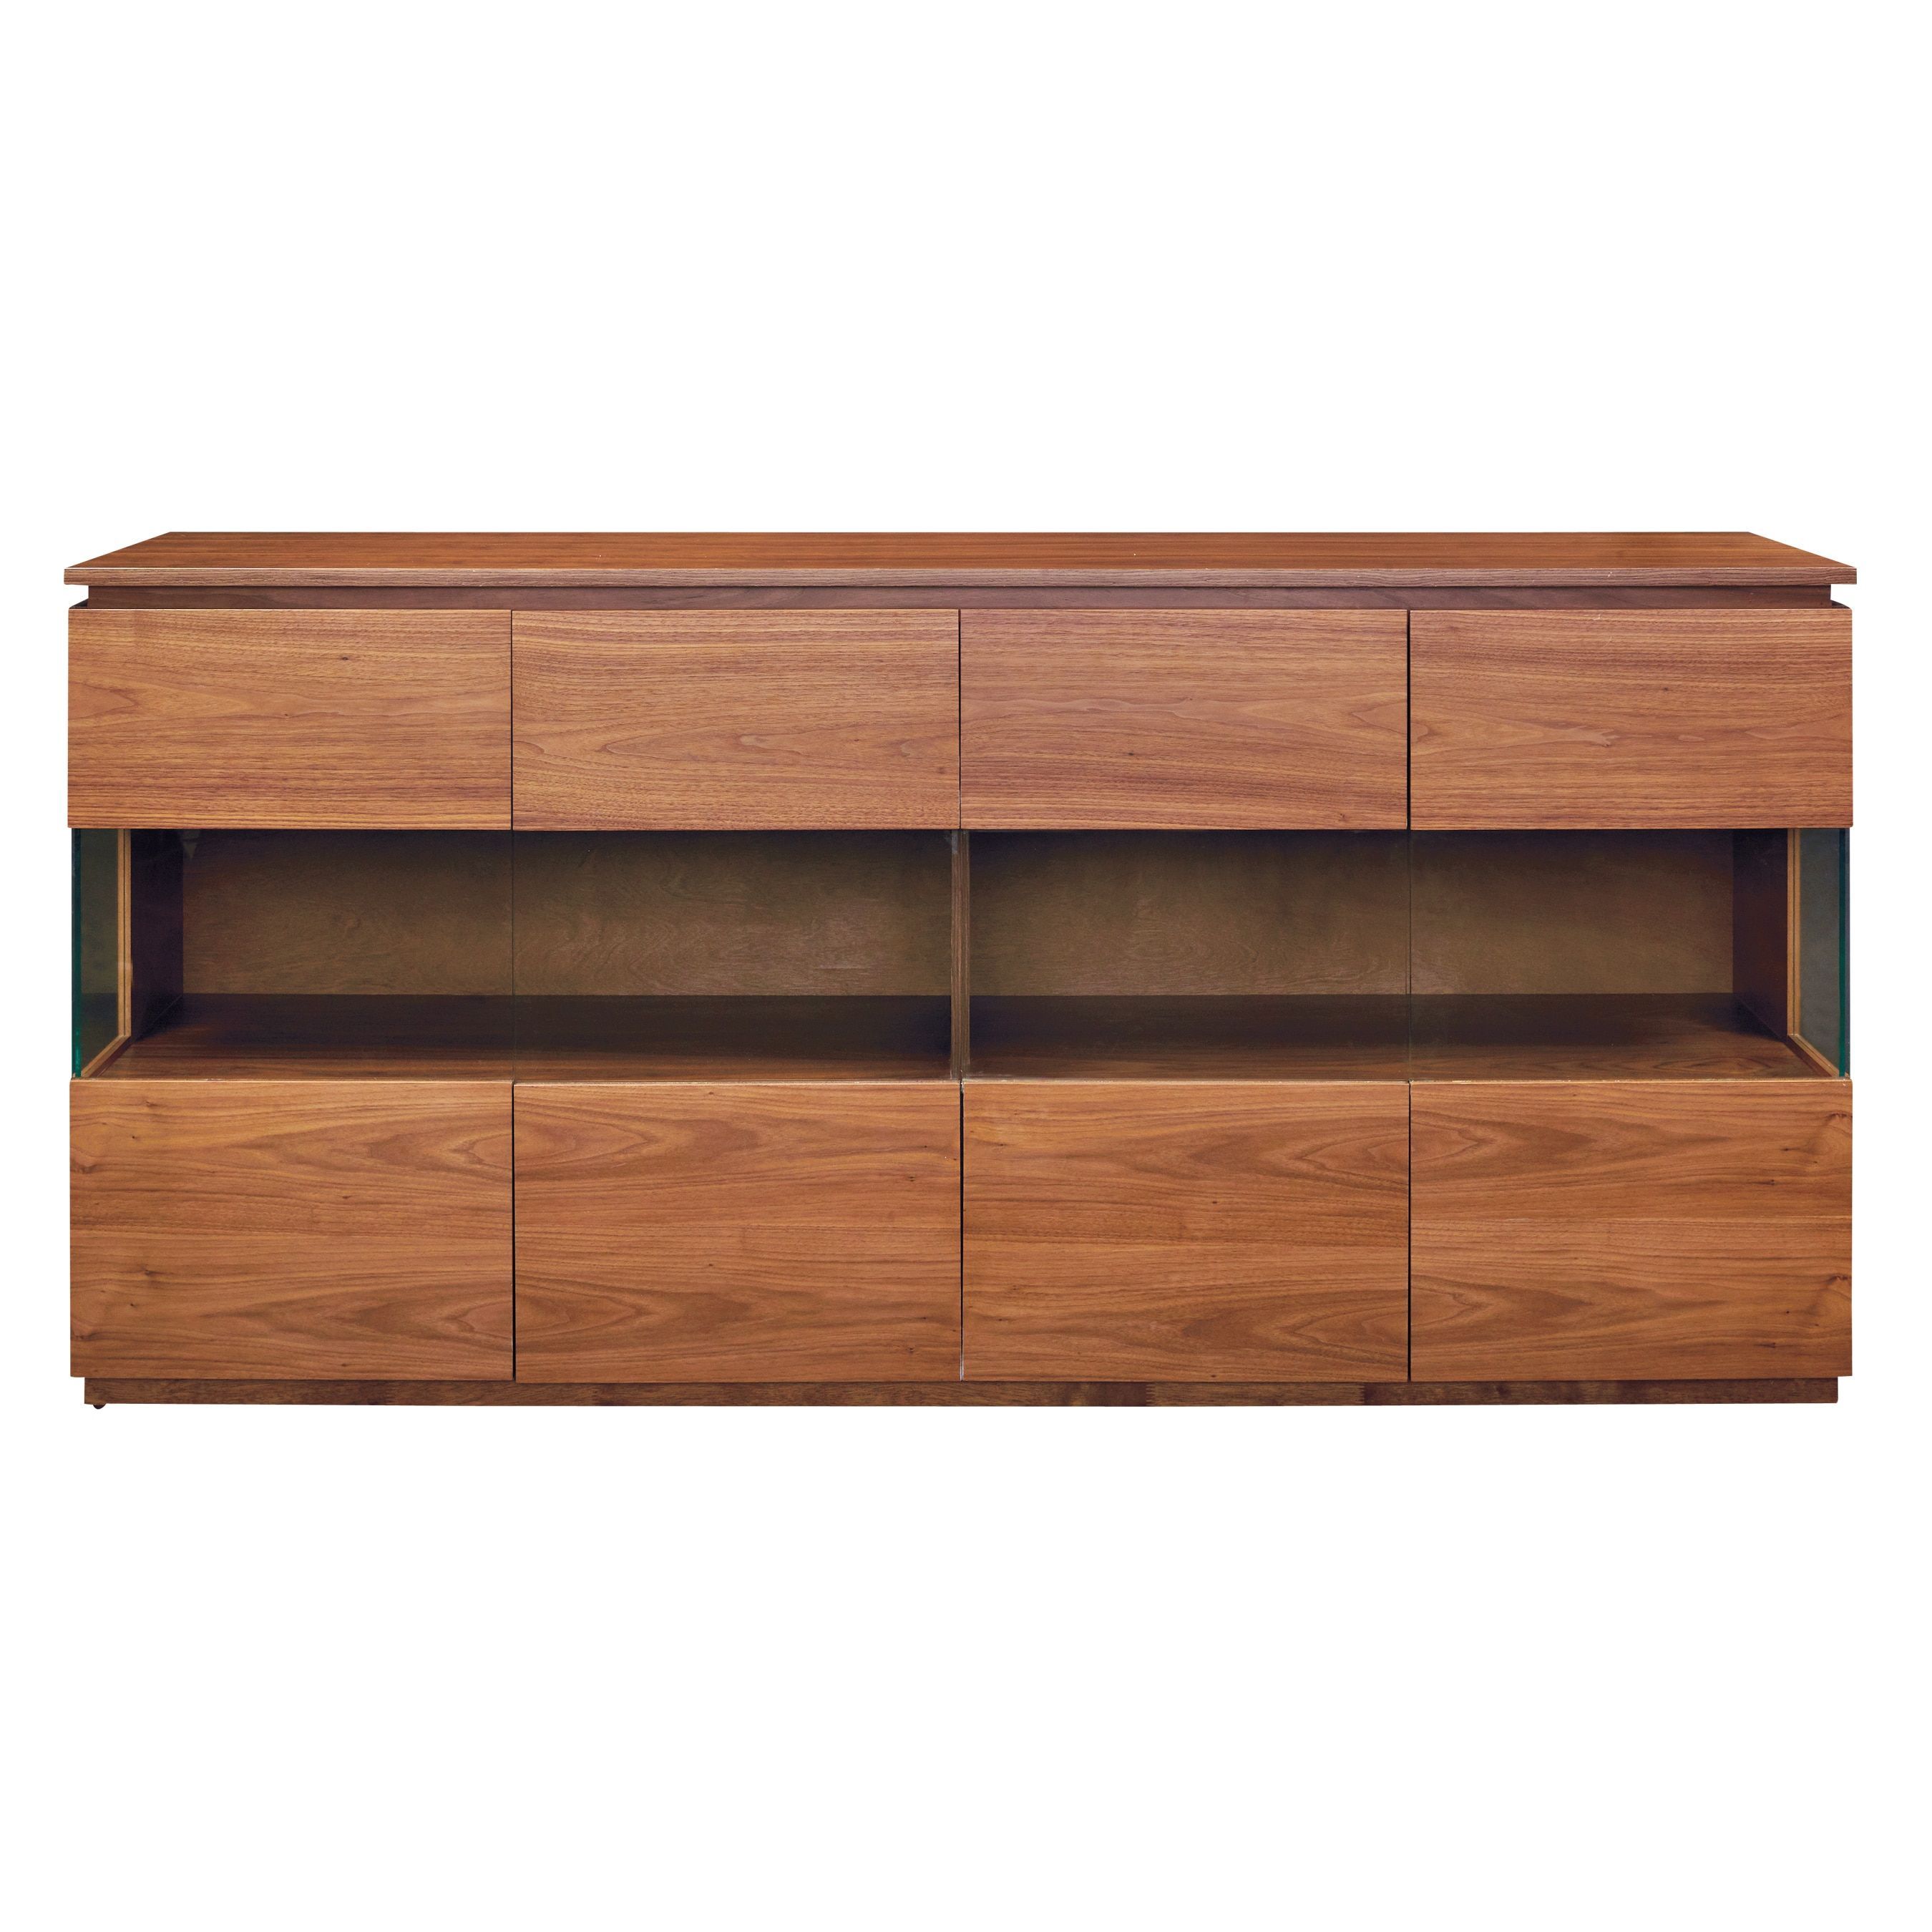 Euro Style Shaw Sideboard (American Walnut), Brown | Products